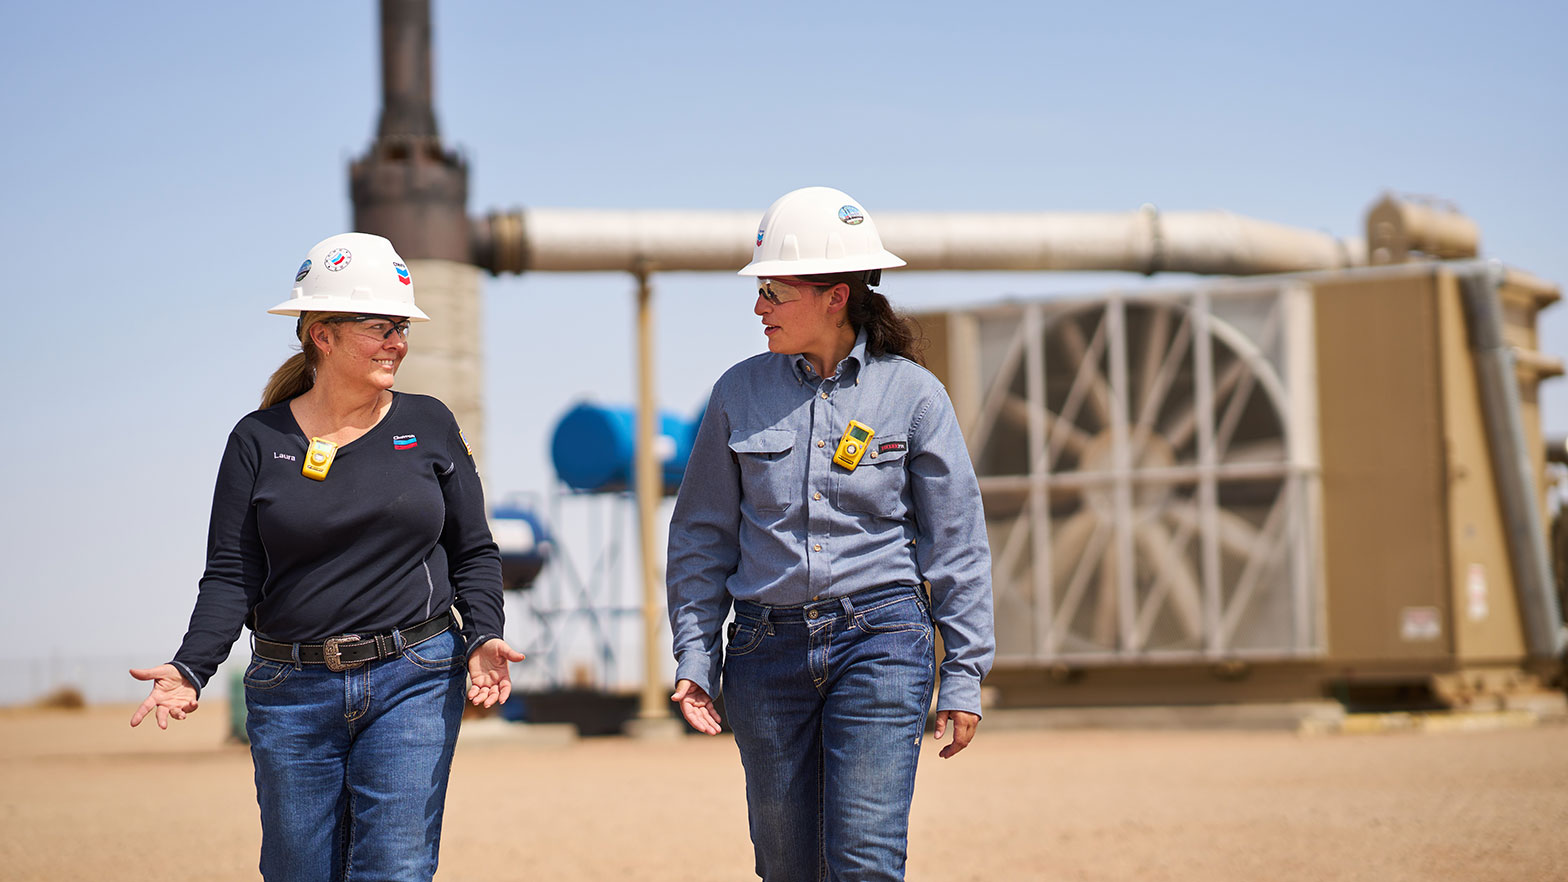 two women chevron employees walk and discuss the pipeline